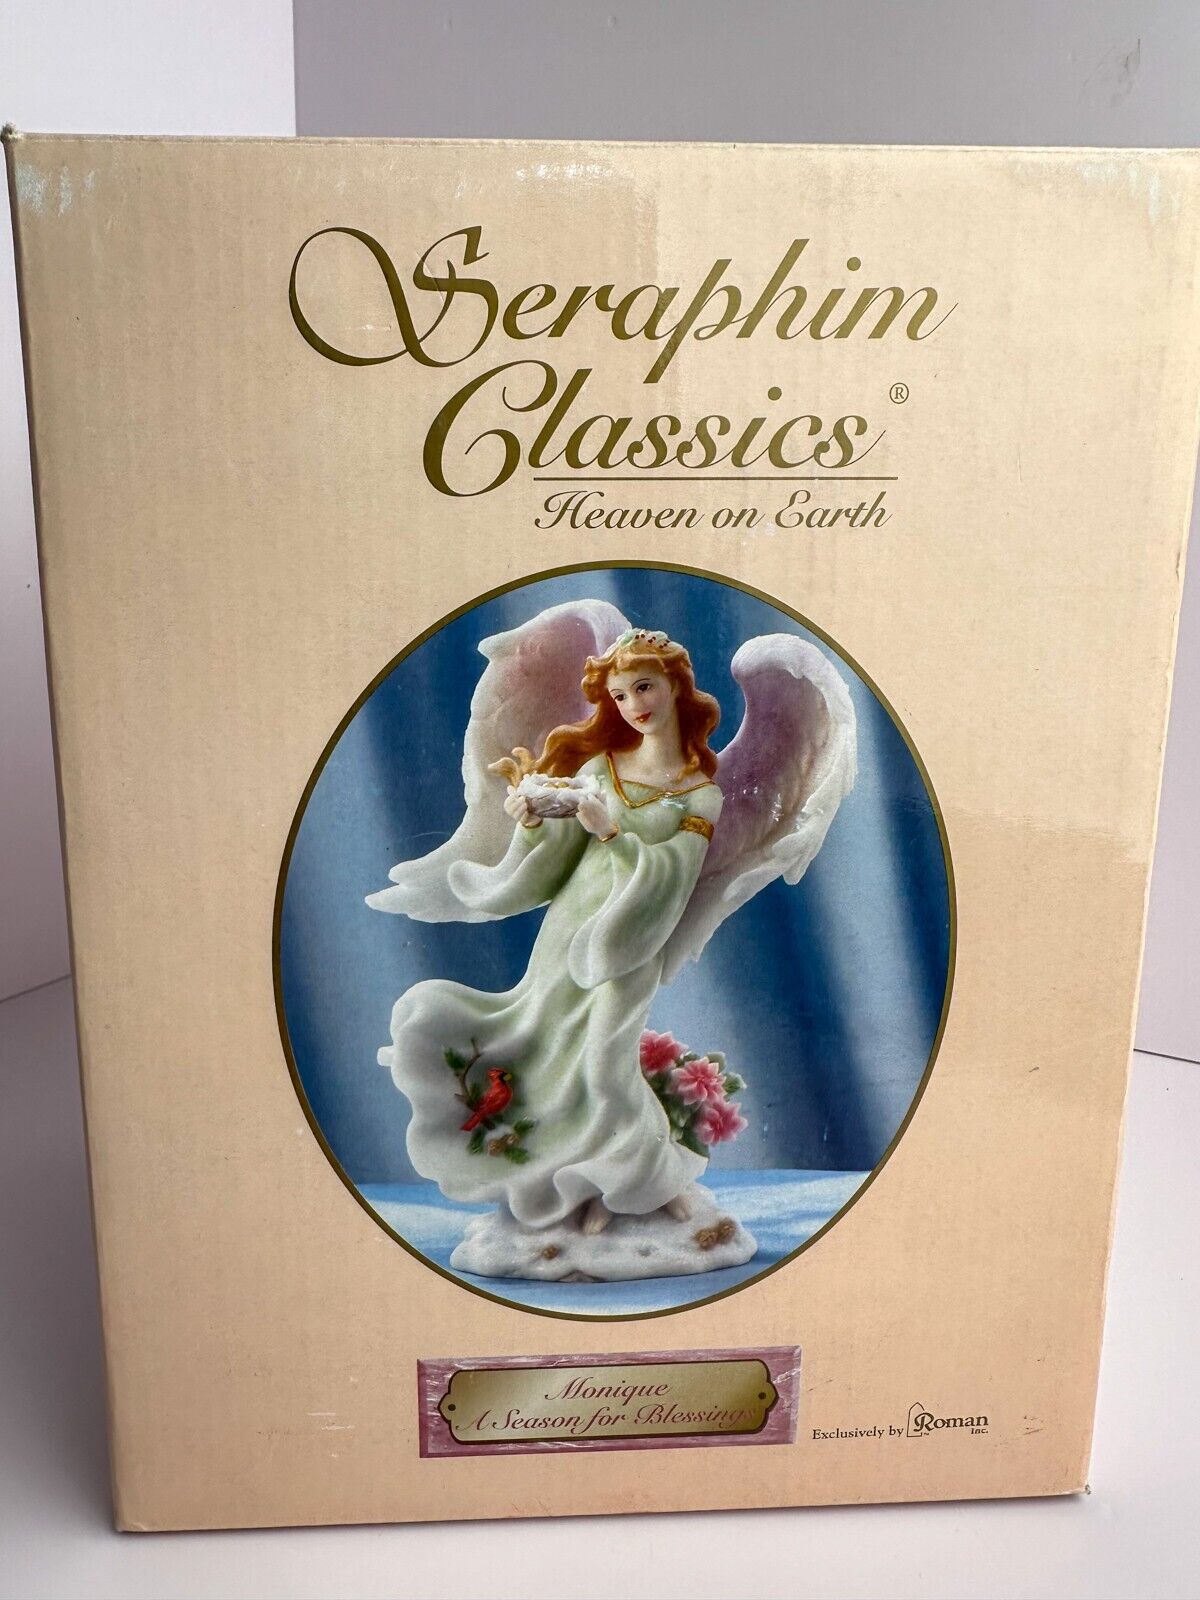 Seraphim Classics Angel Monique A Season For Blessings 78995 Limited 597 of 5000